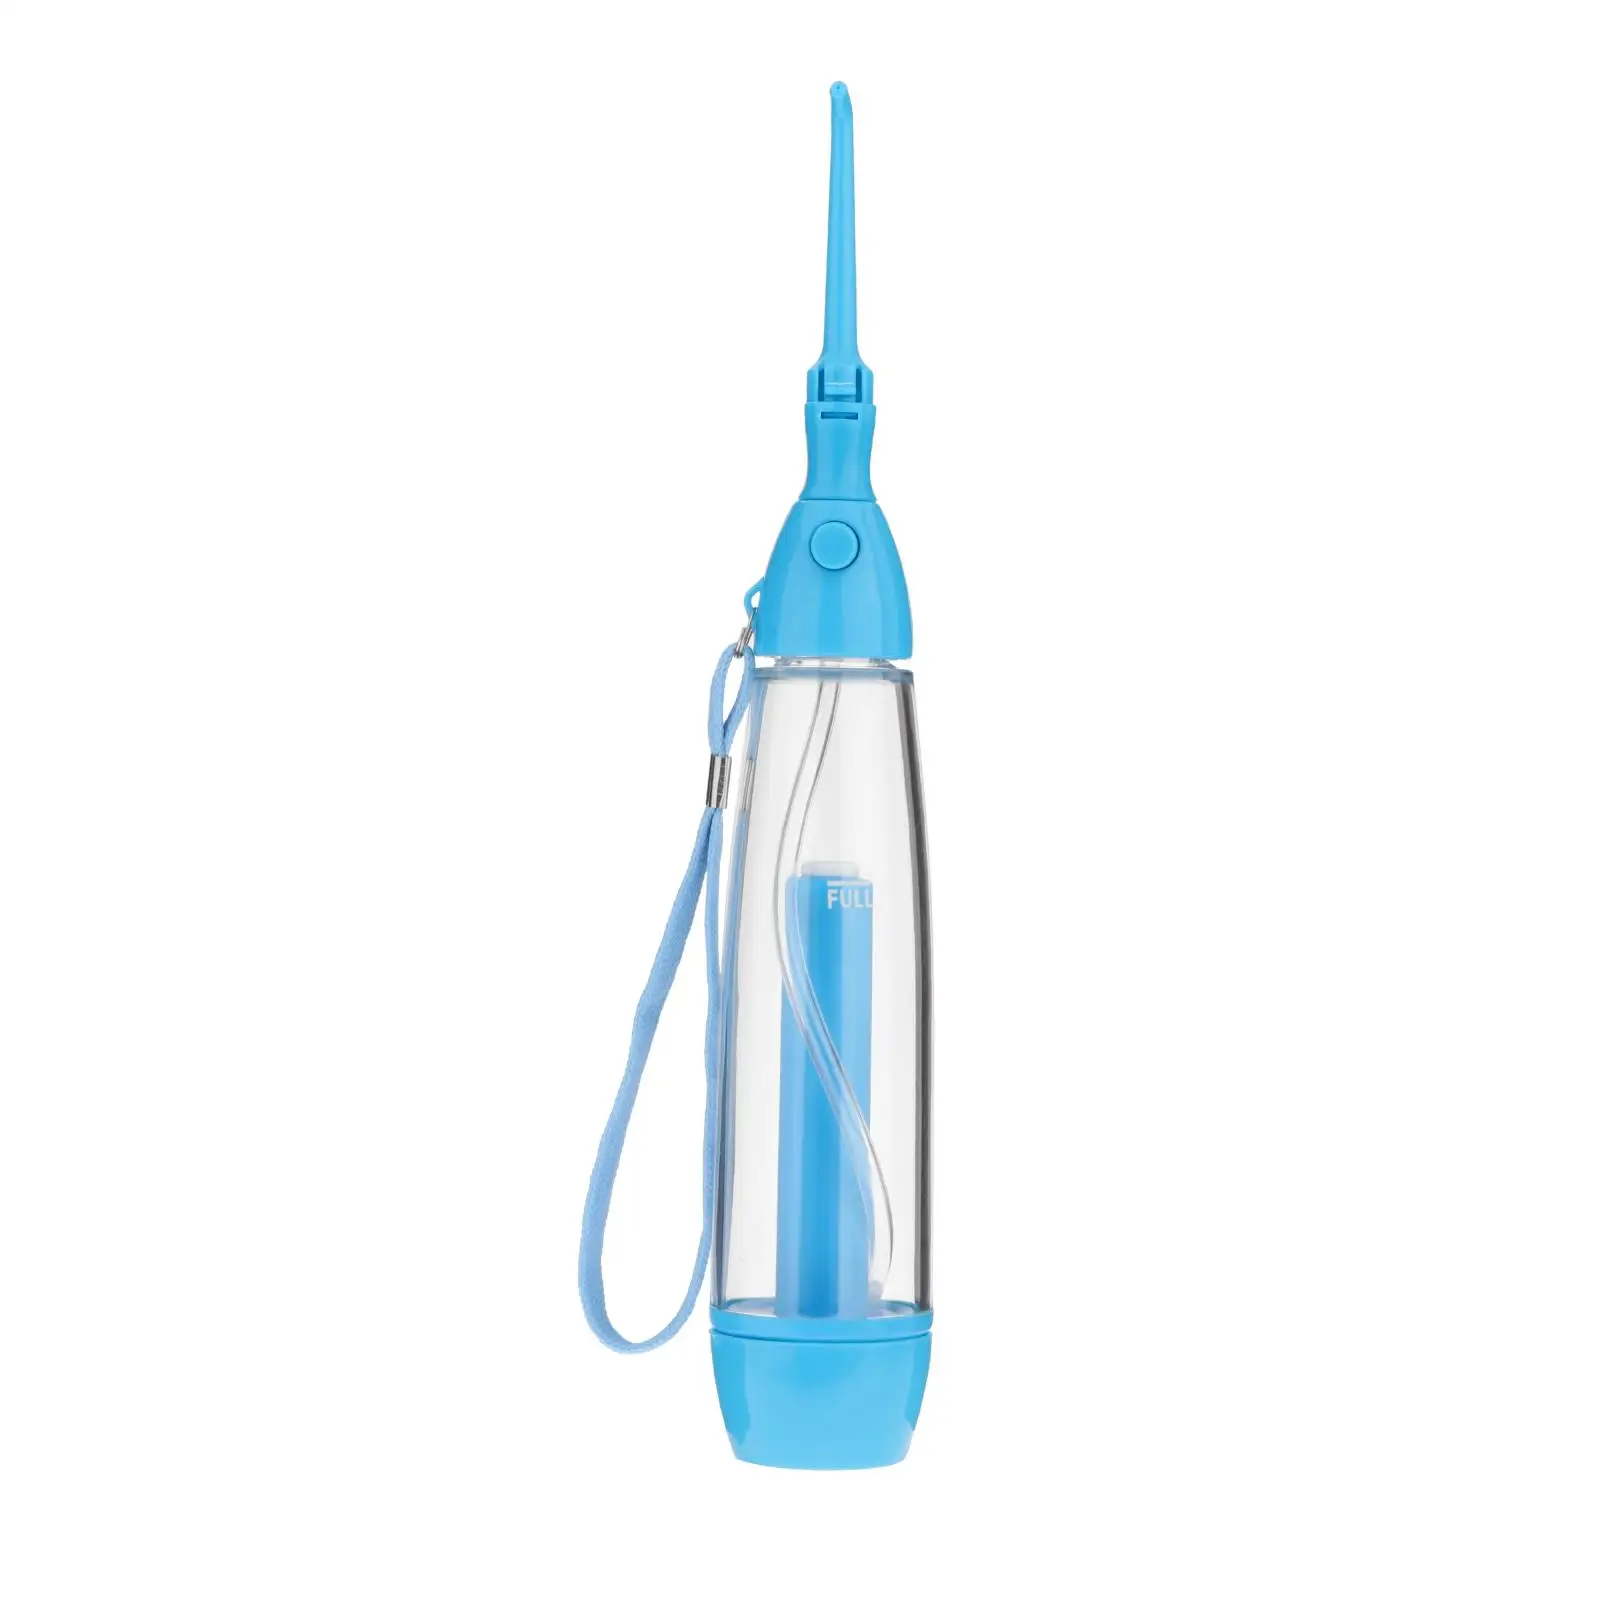 Portable Jet Oral Irrigator Cleaner Care Tool